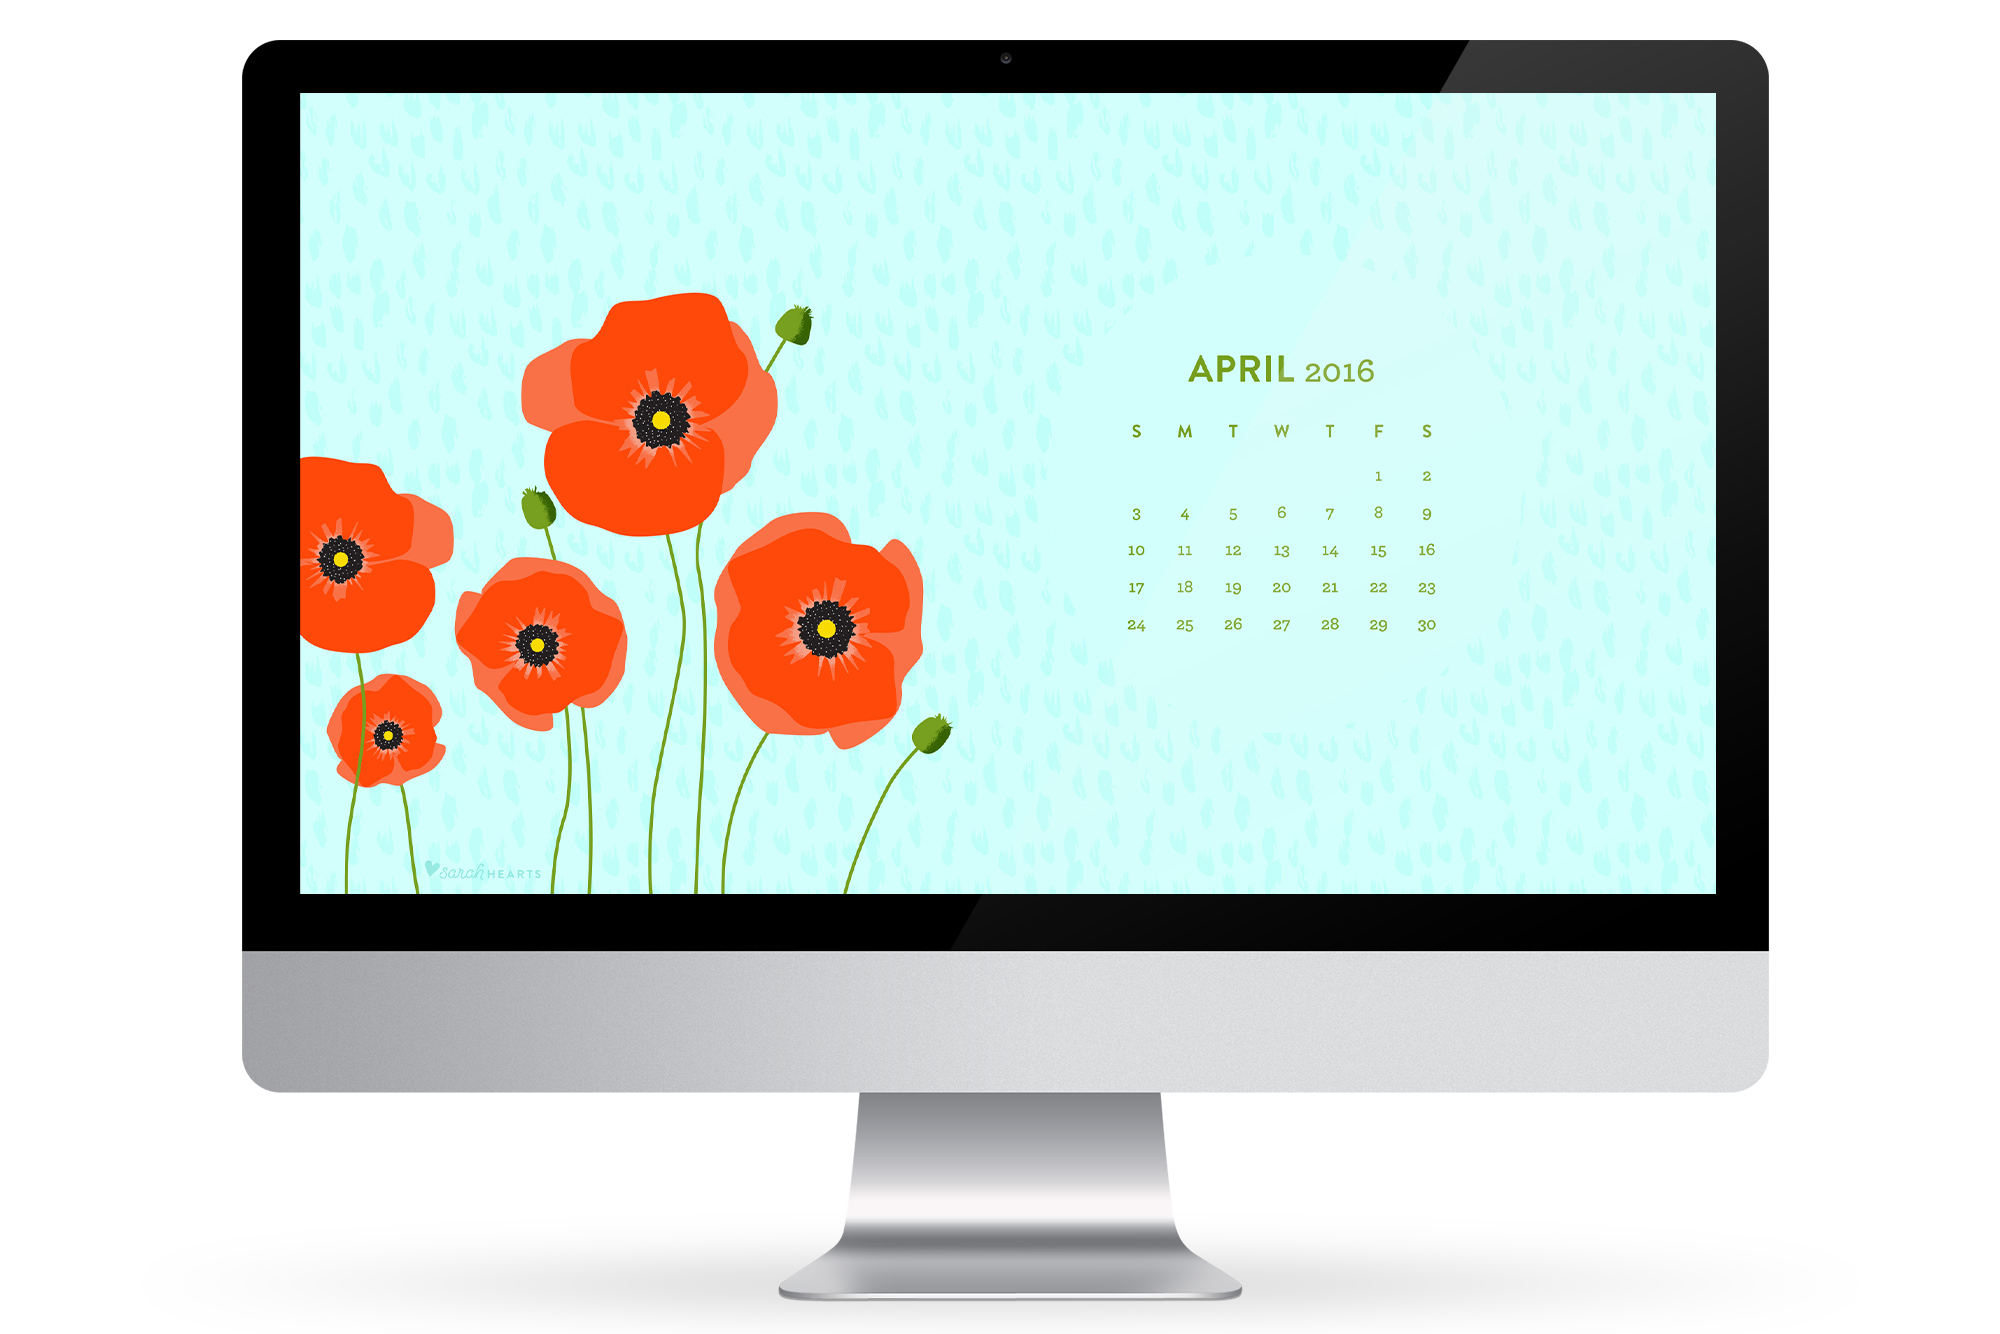  computer phone or tablet with this free April 2016 calendar wallpaper